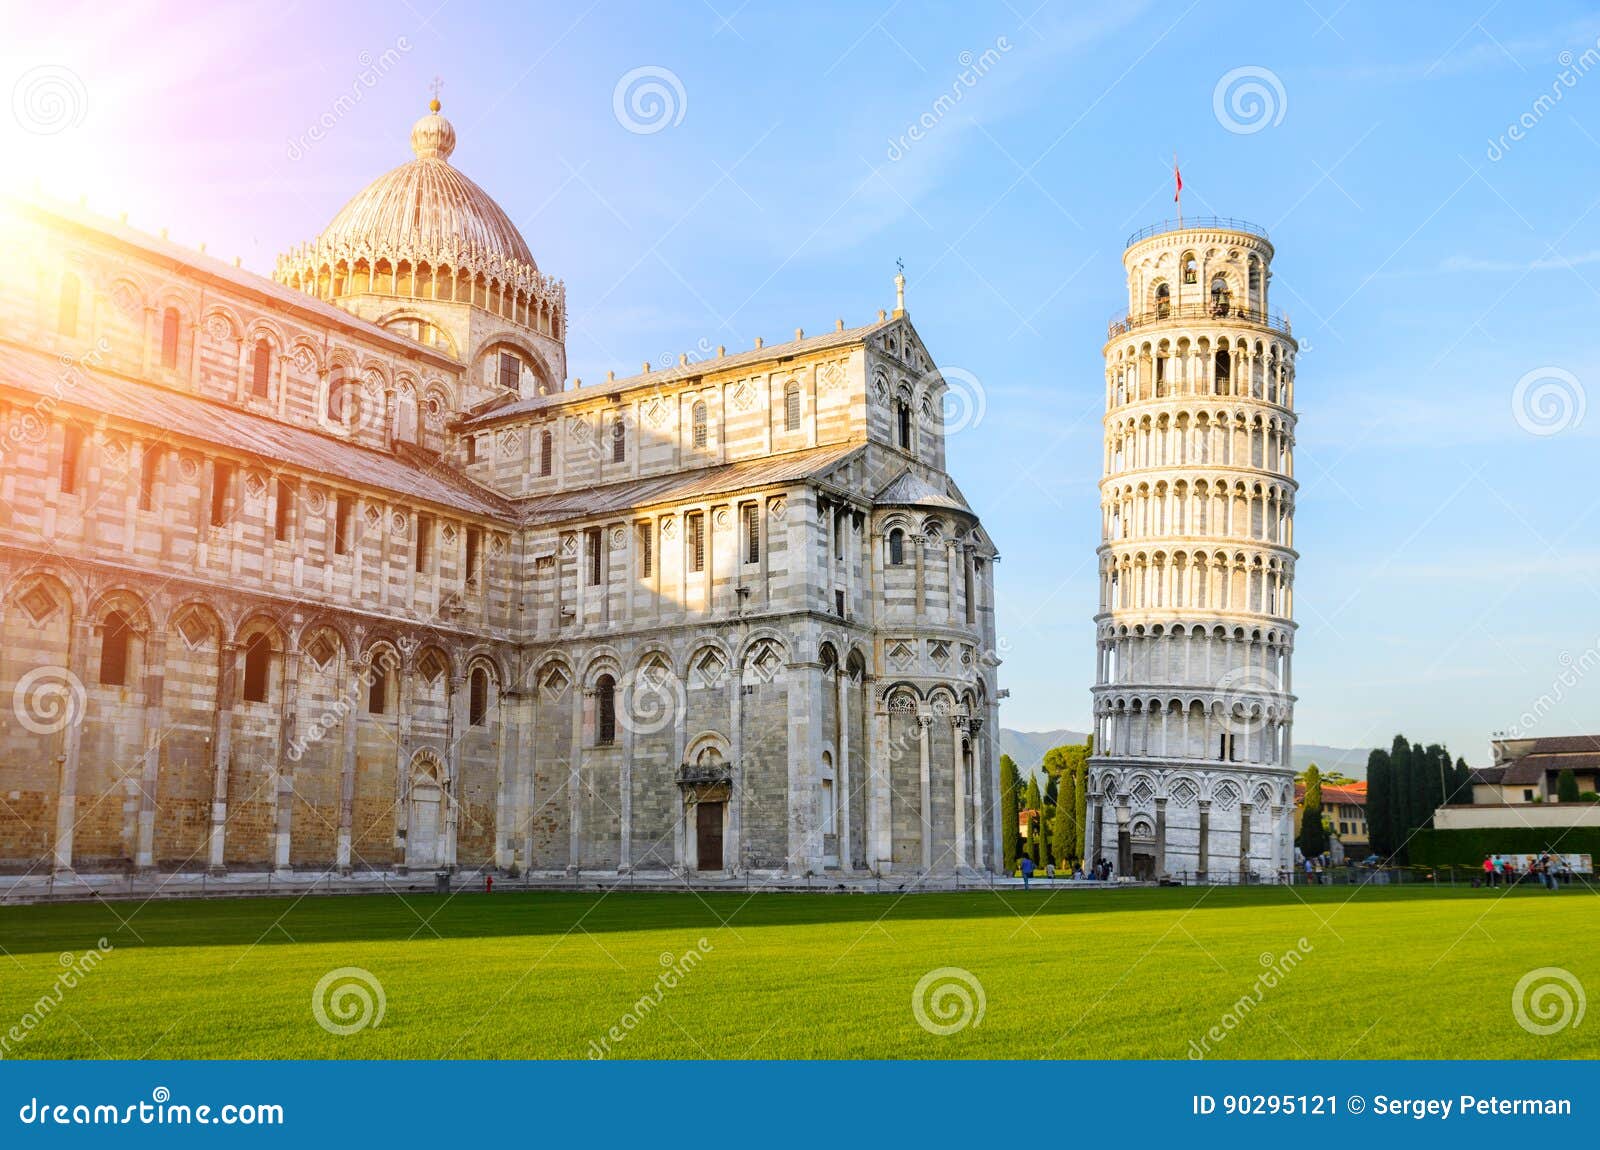 leaning tower of pisa at sunset